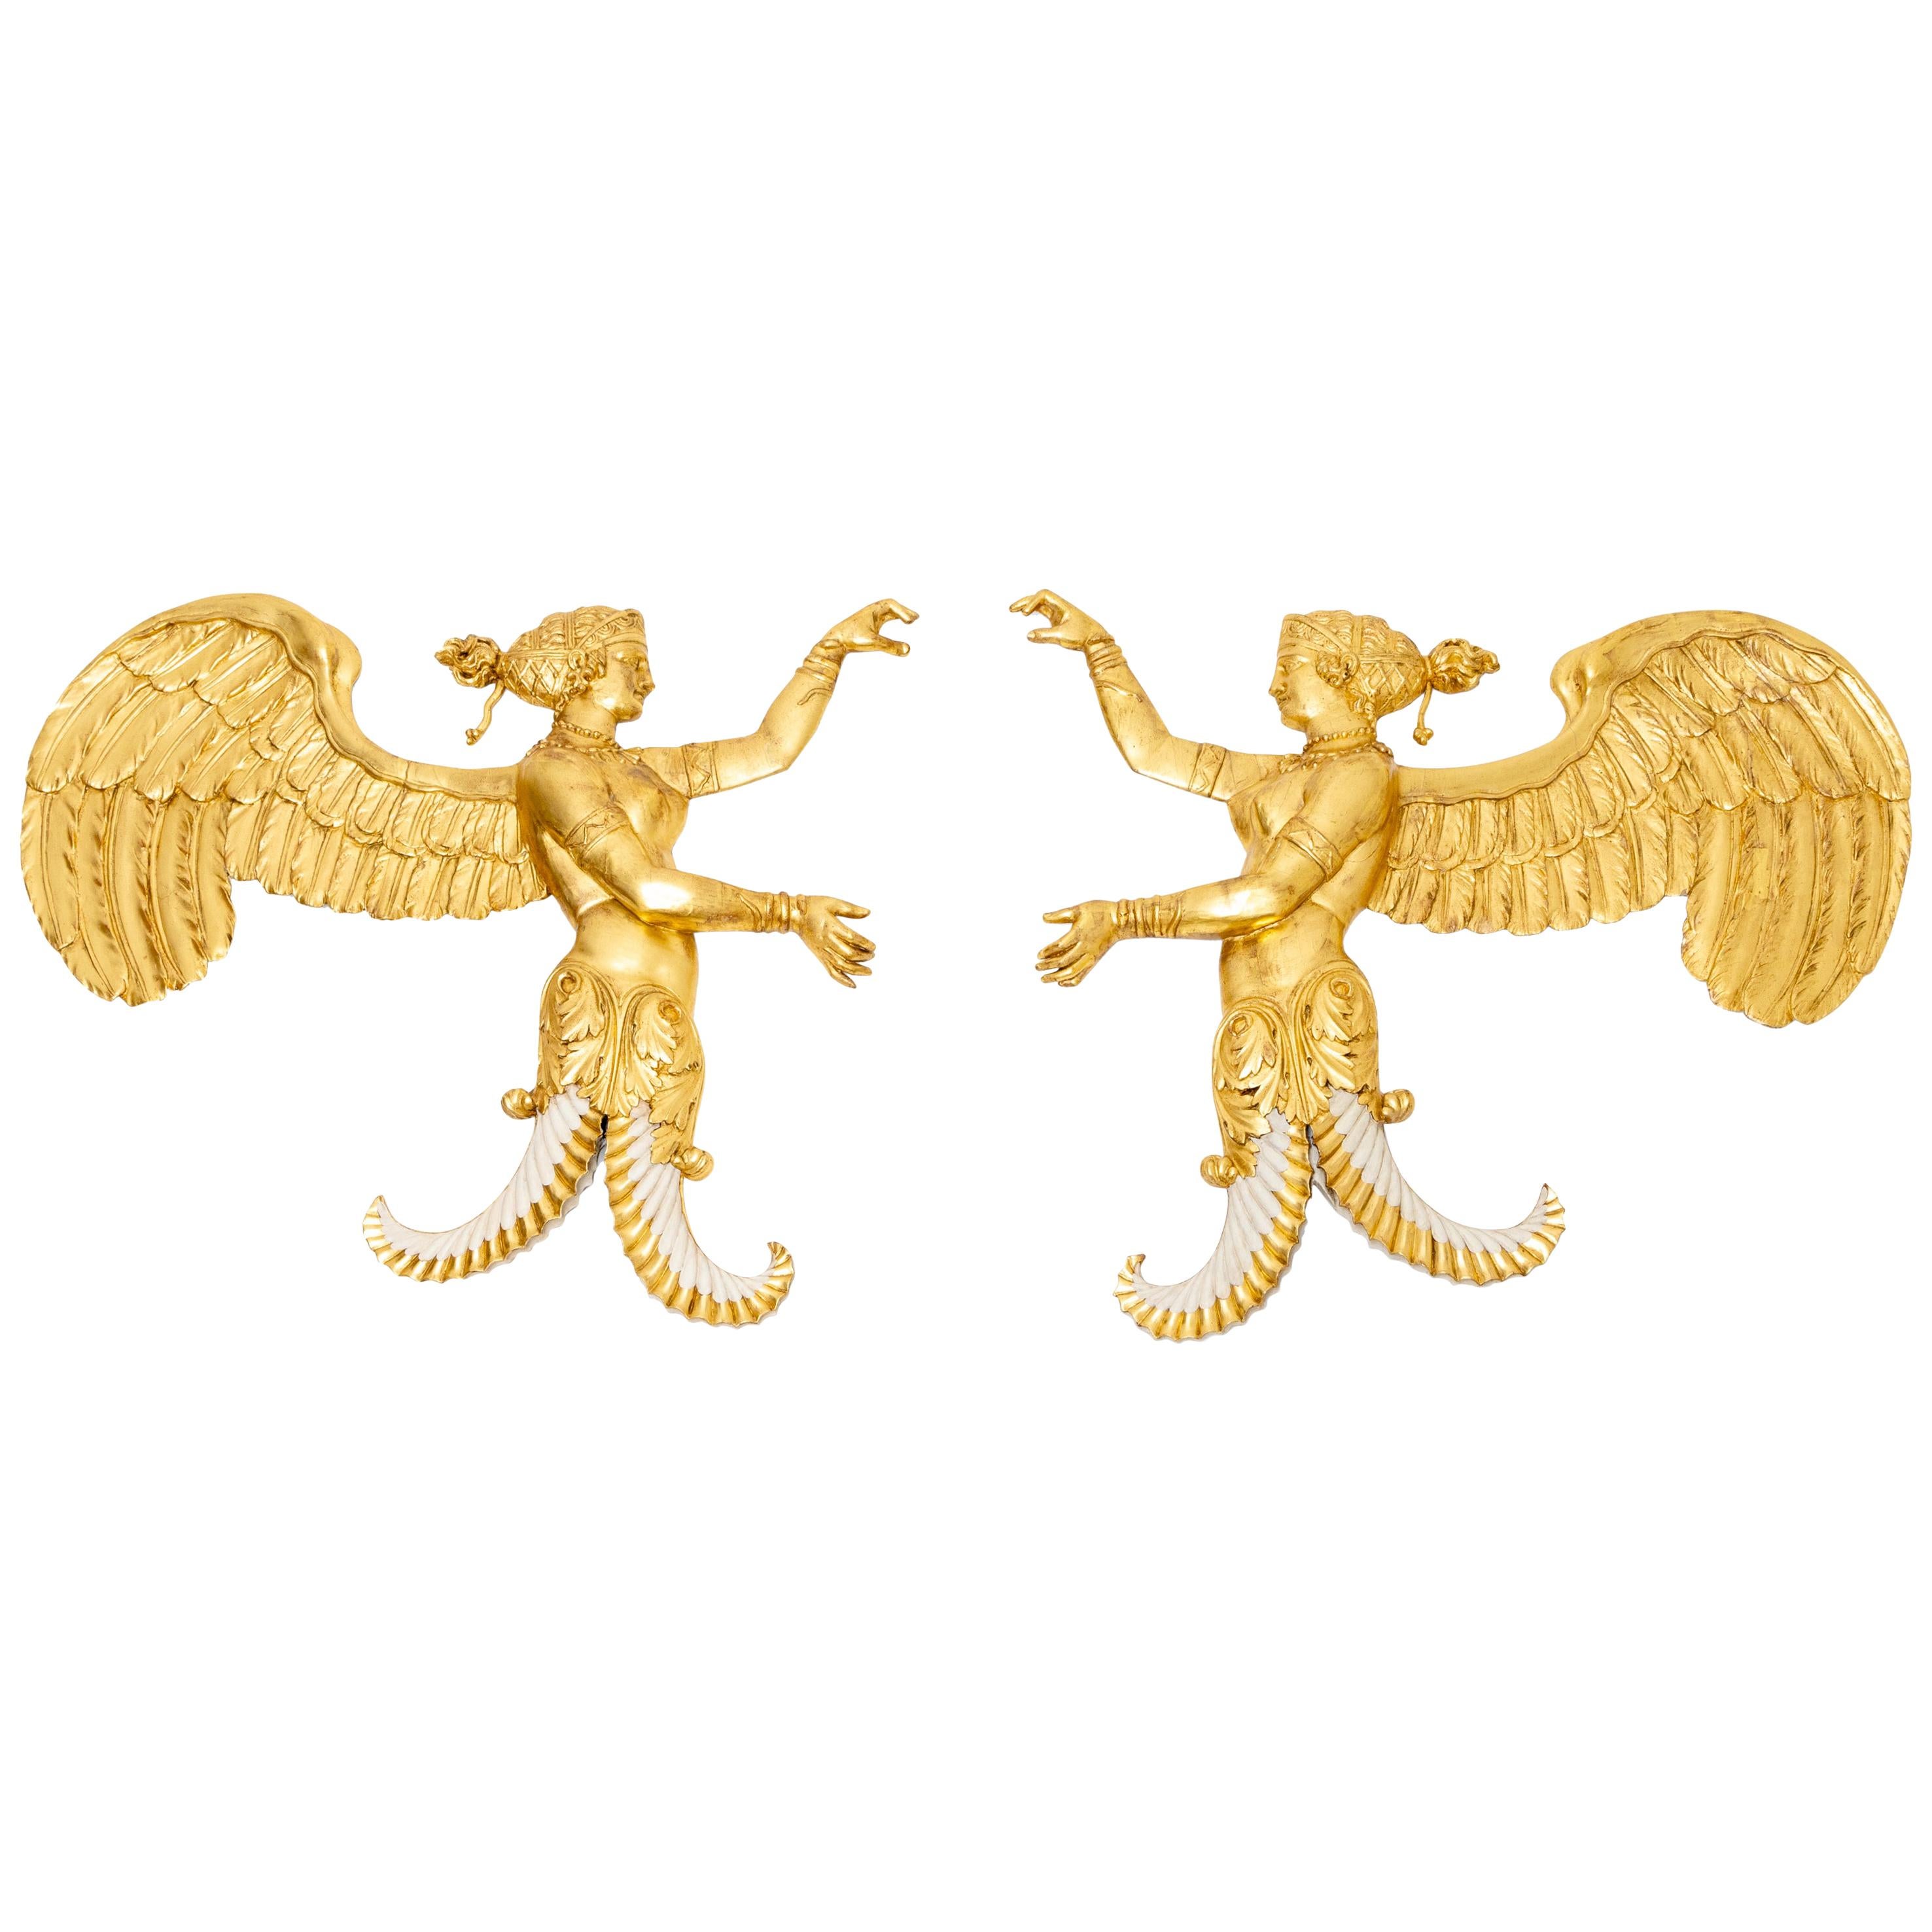 Pair of Figurative Gilt Wall Reliefs, Italy, Early 19th Century